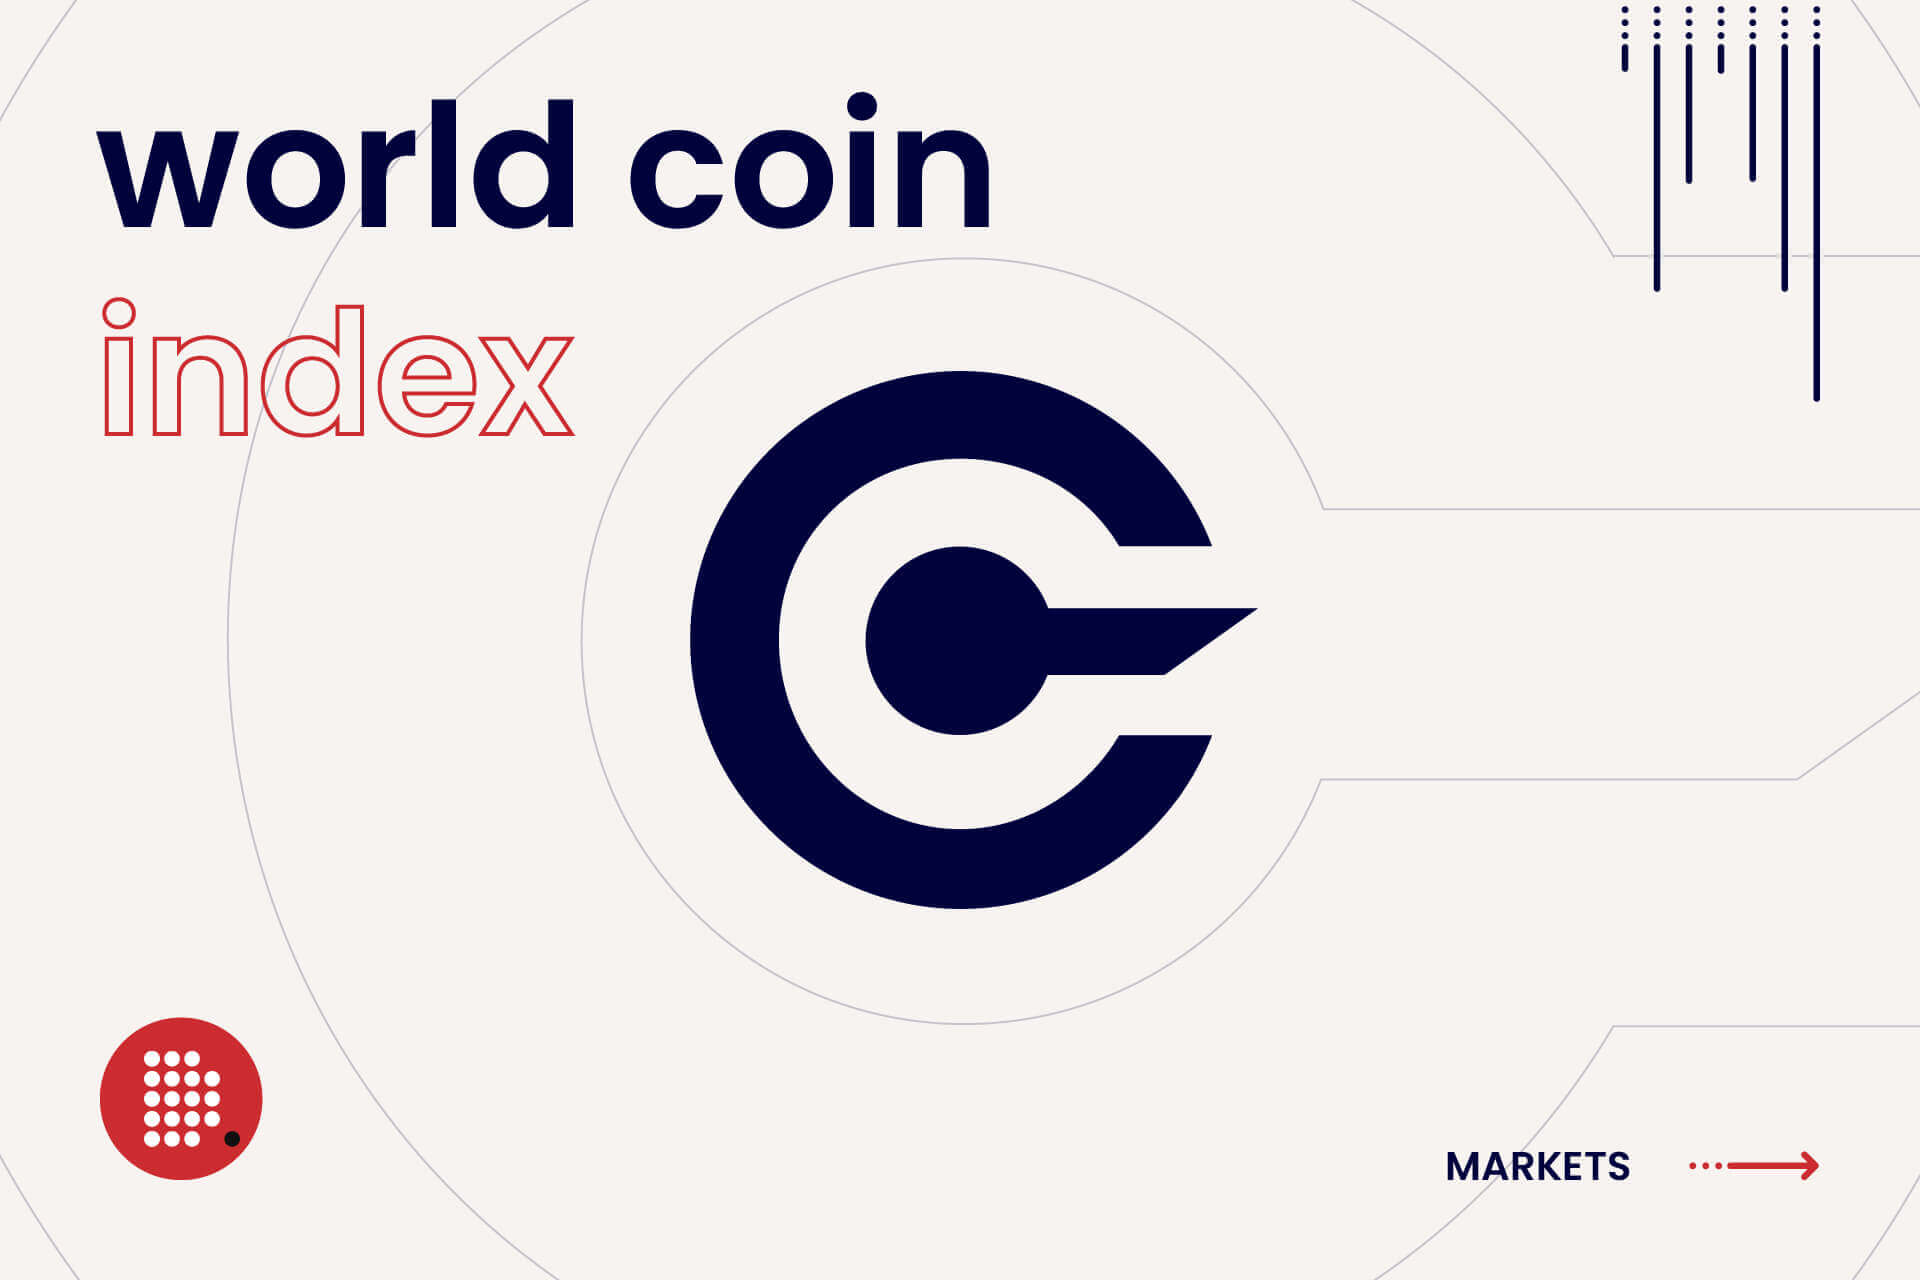 WorldCoinIndex: The Complete Guide